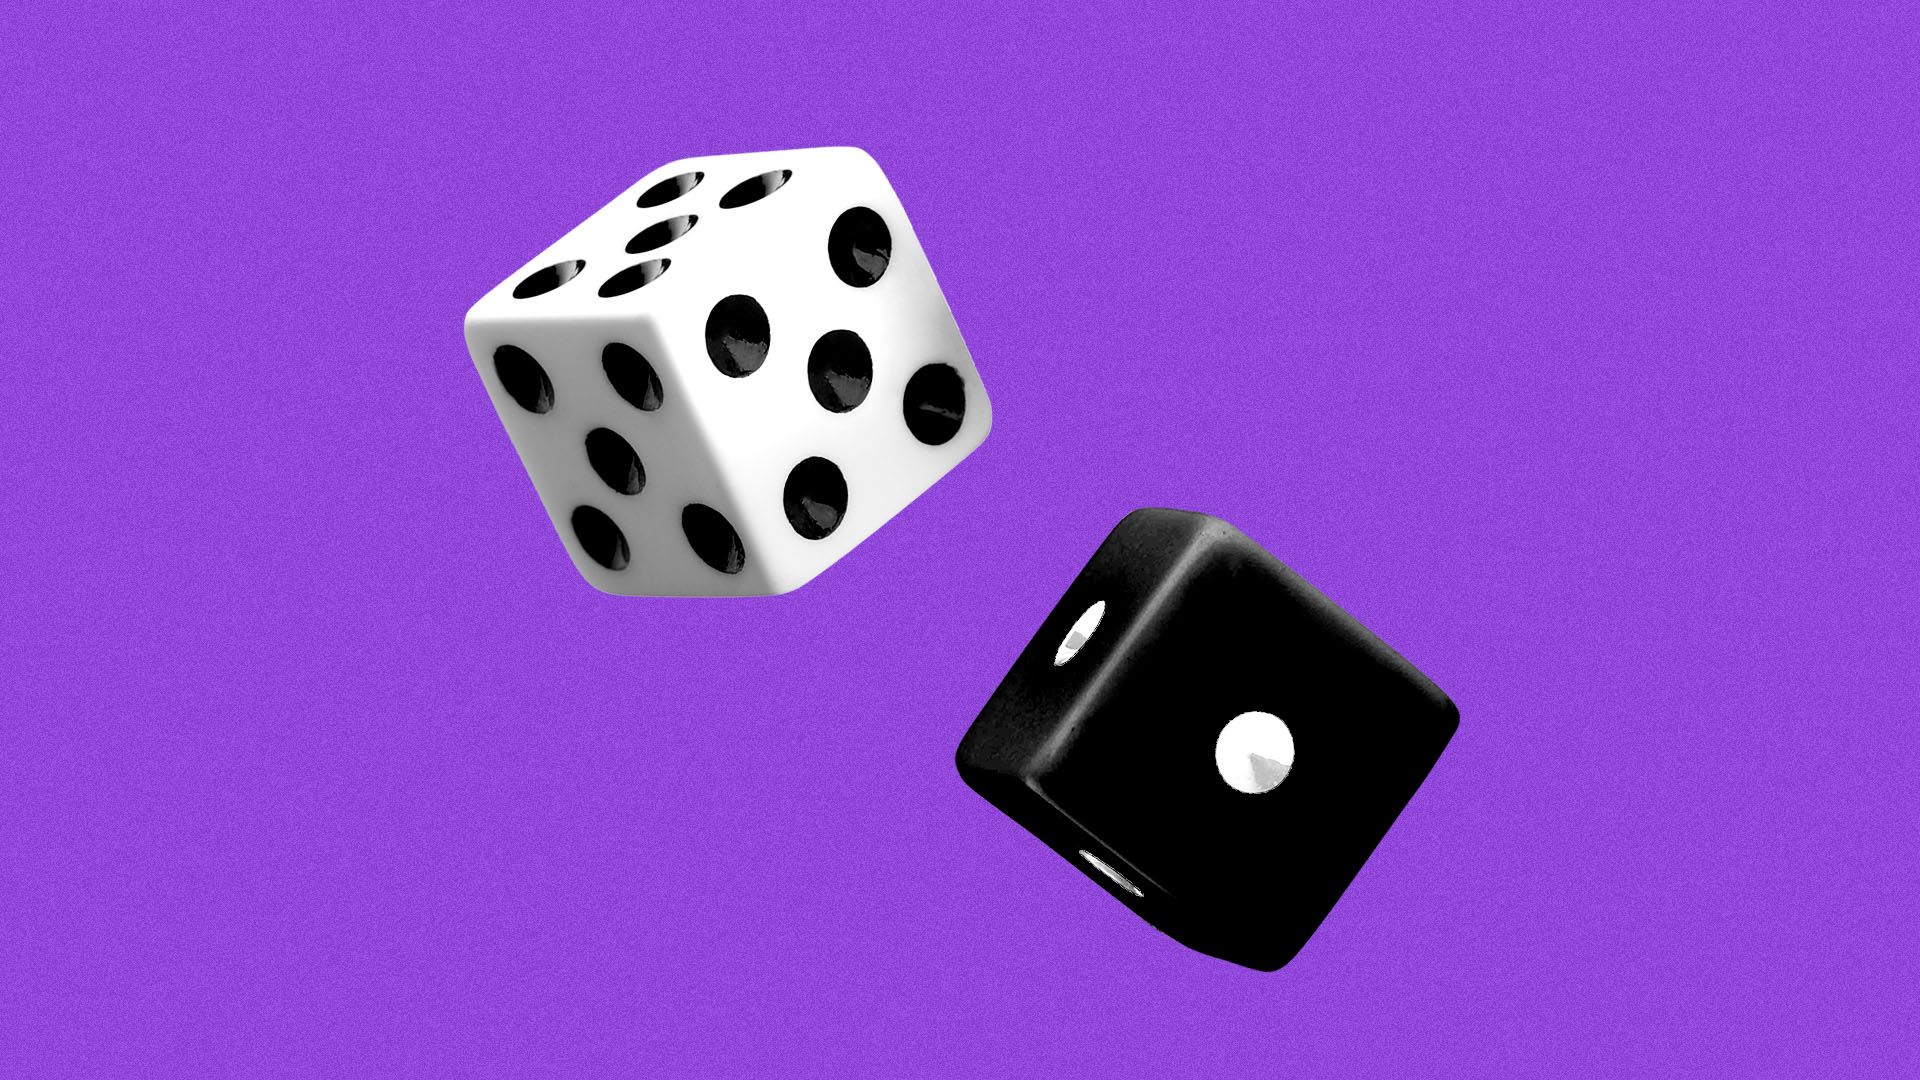 Illustration of a white dice with five black pips on all sides, contrasted with a black dice with a single white pip on all sides